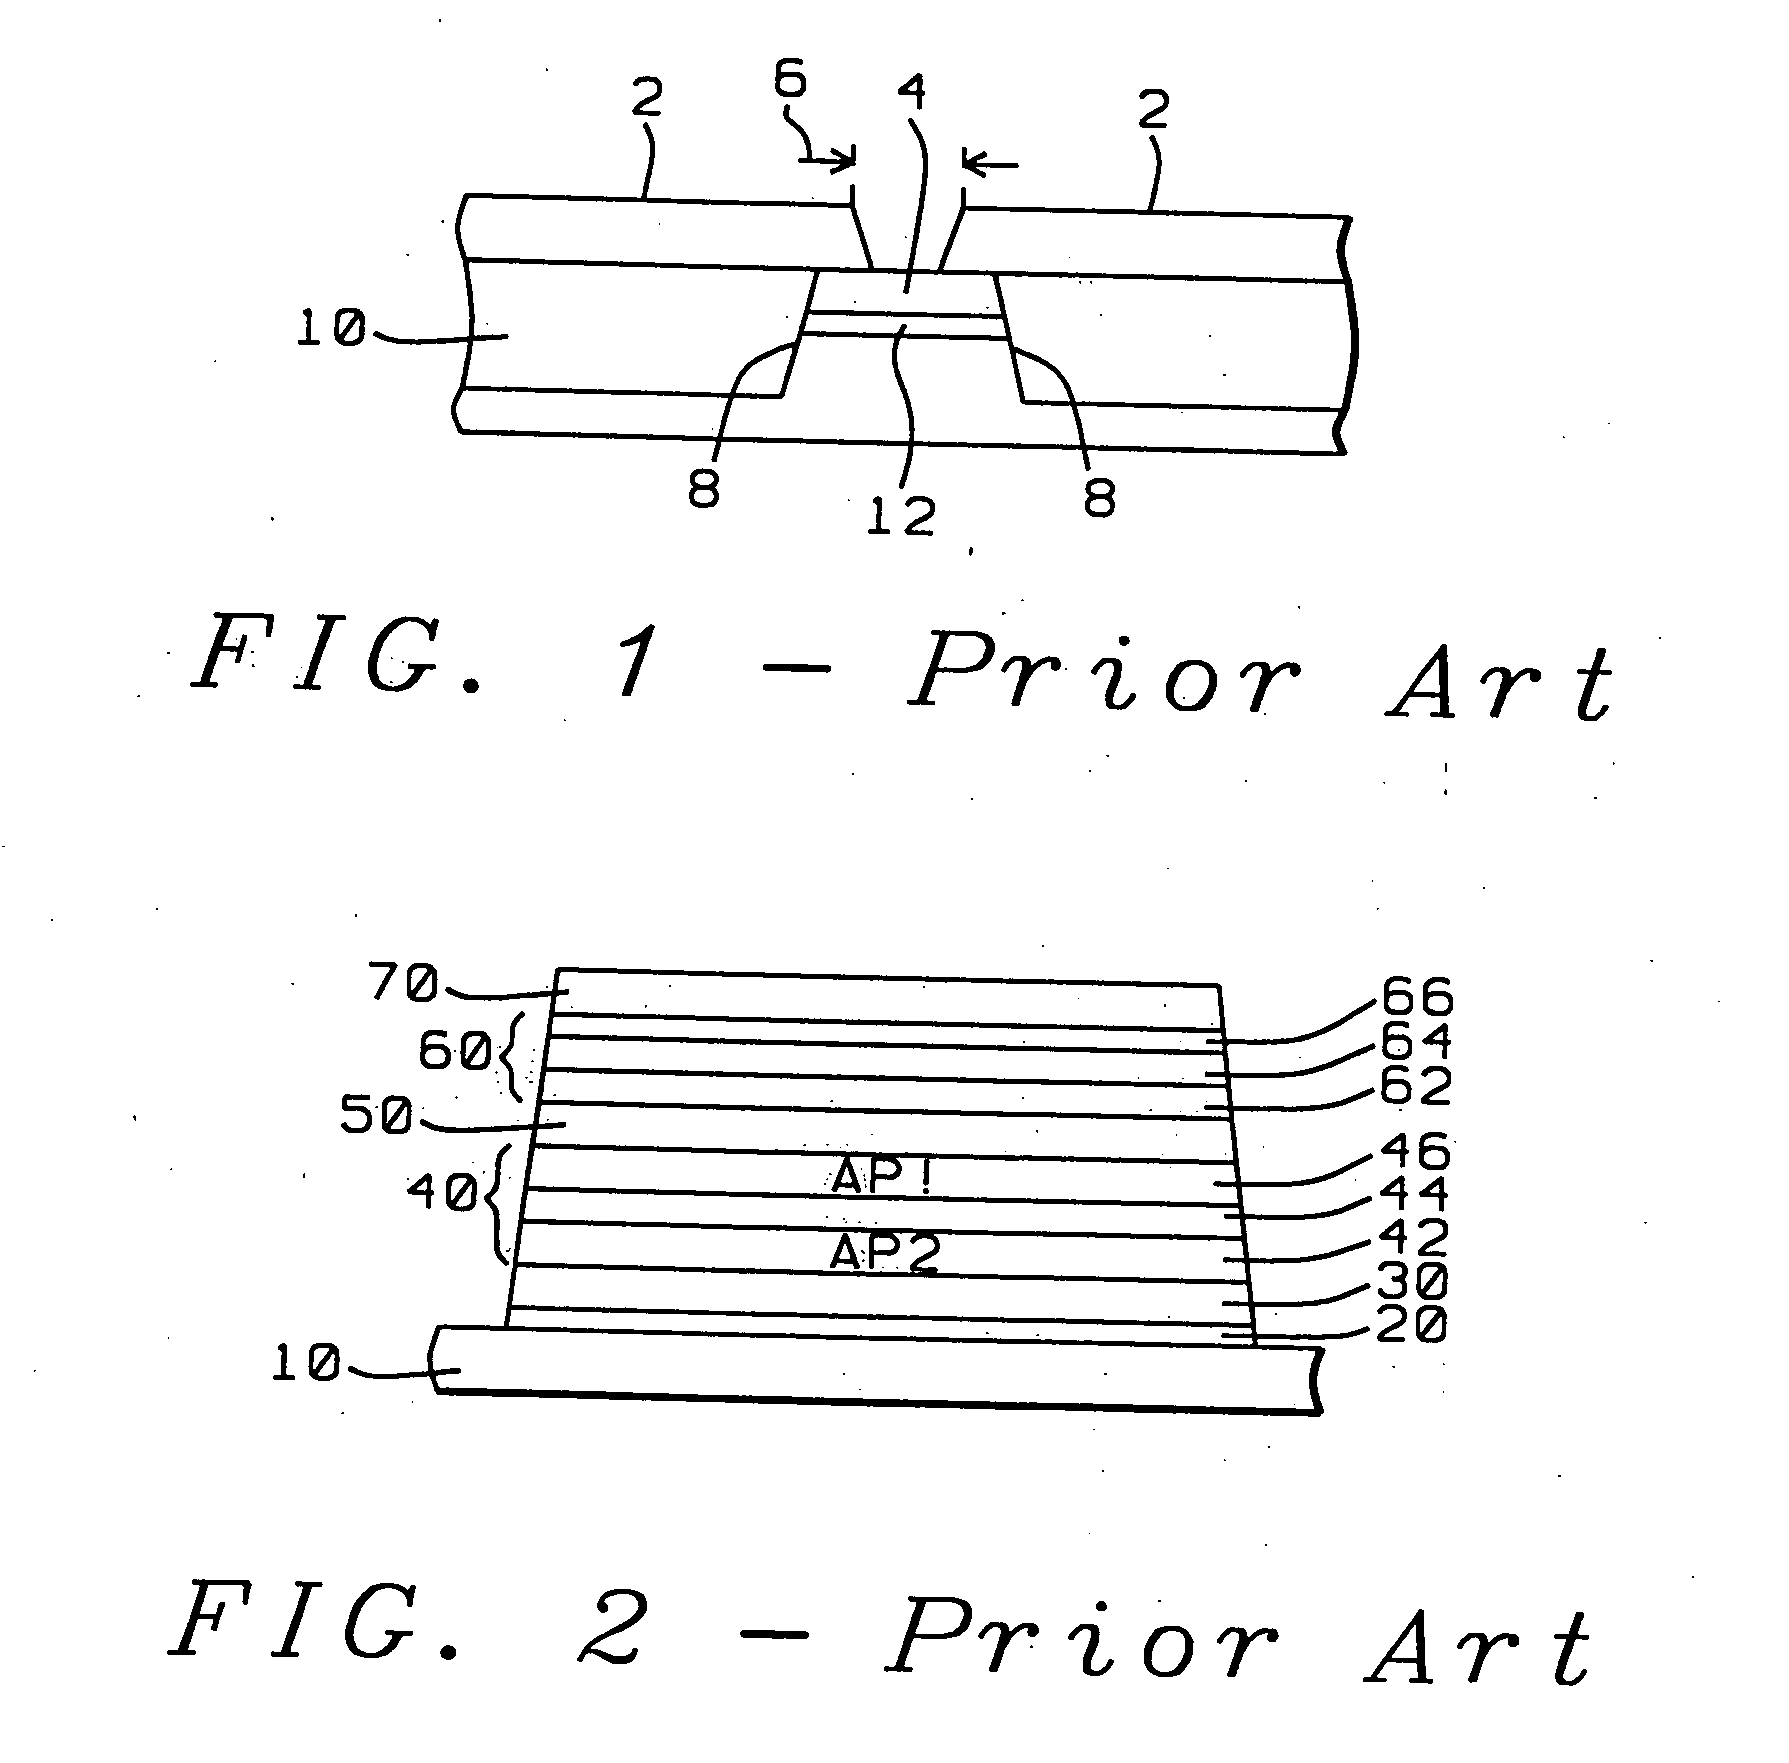 Structure and process to fabricate lead overlay (LOL) on the bottom spin valve